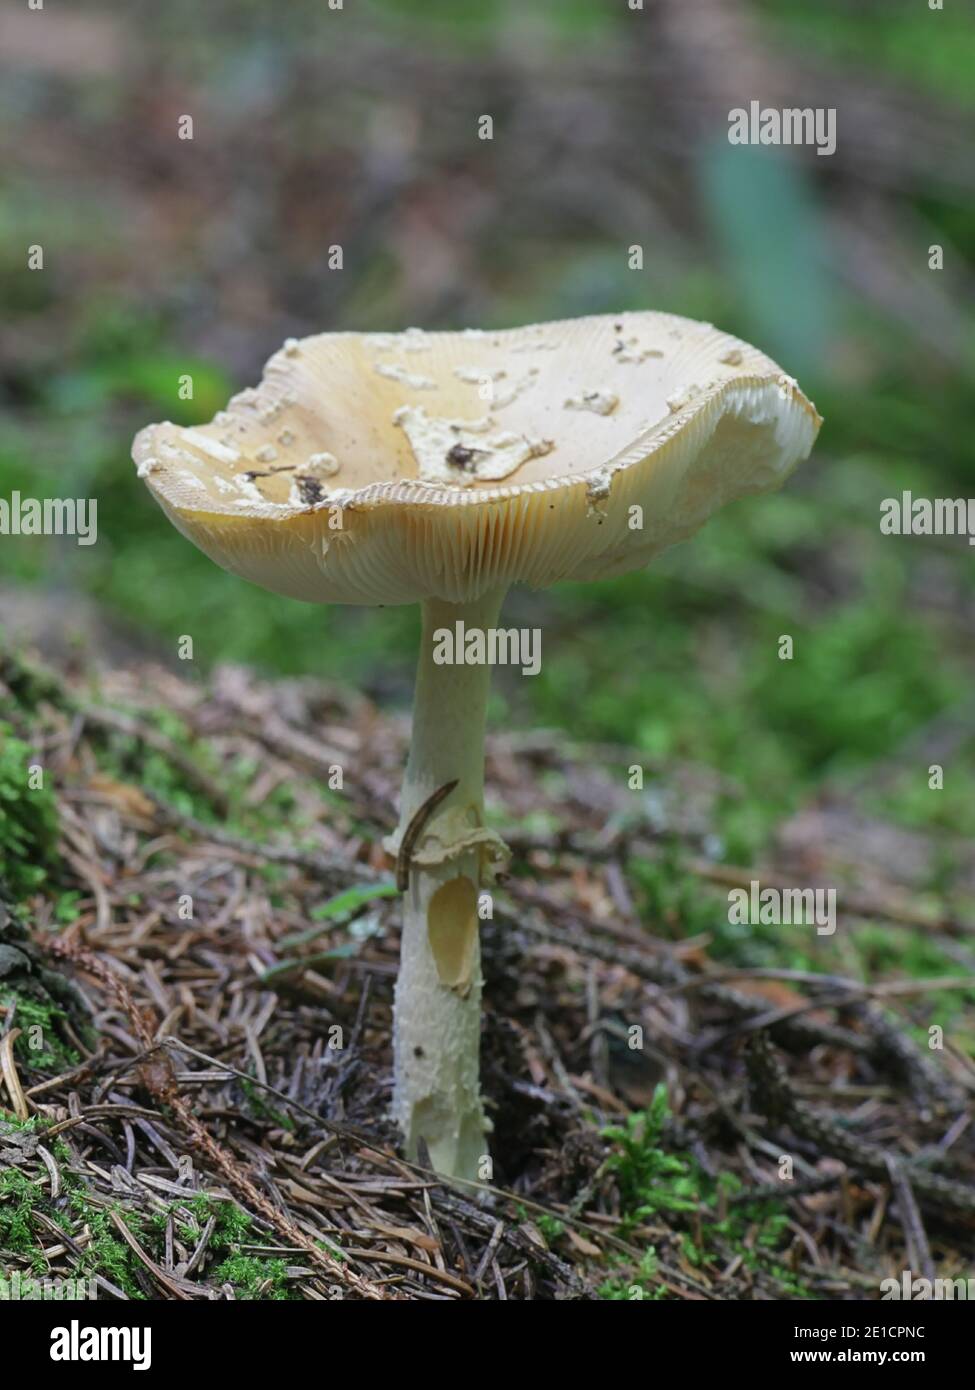 Amanita friabilis, also called Amanitopsis friabilis, commonly known as Fragile Amanita, wild mushroom from Finland Stock Photo